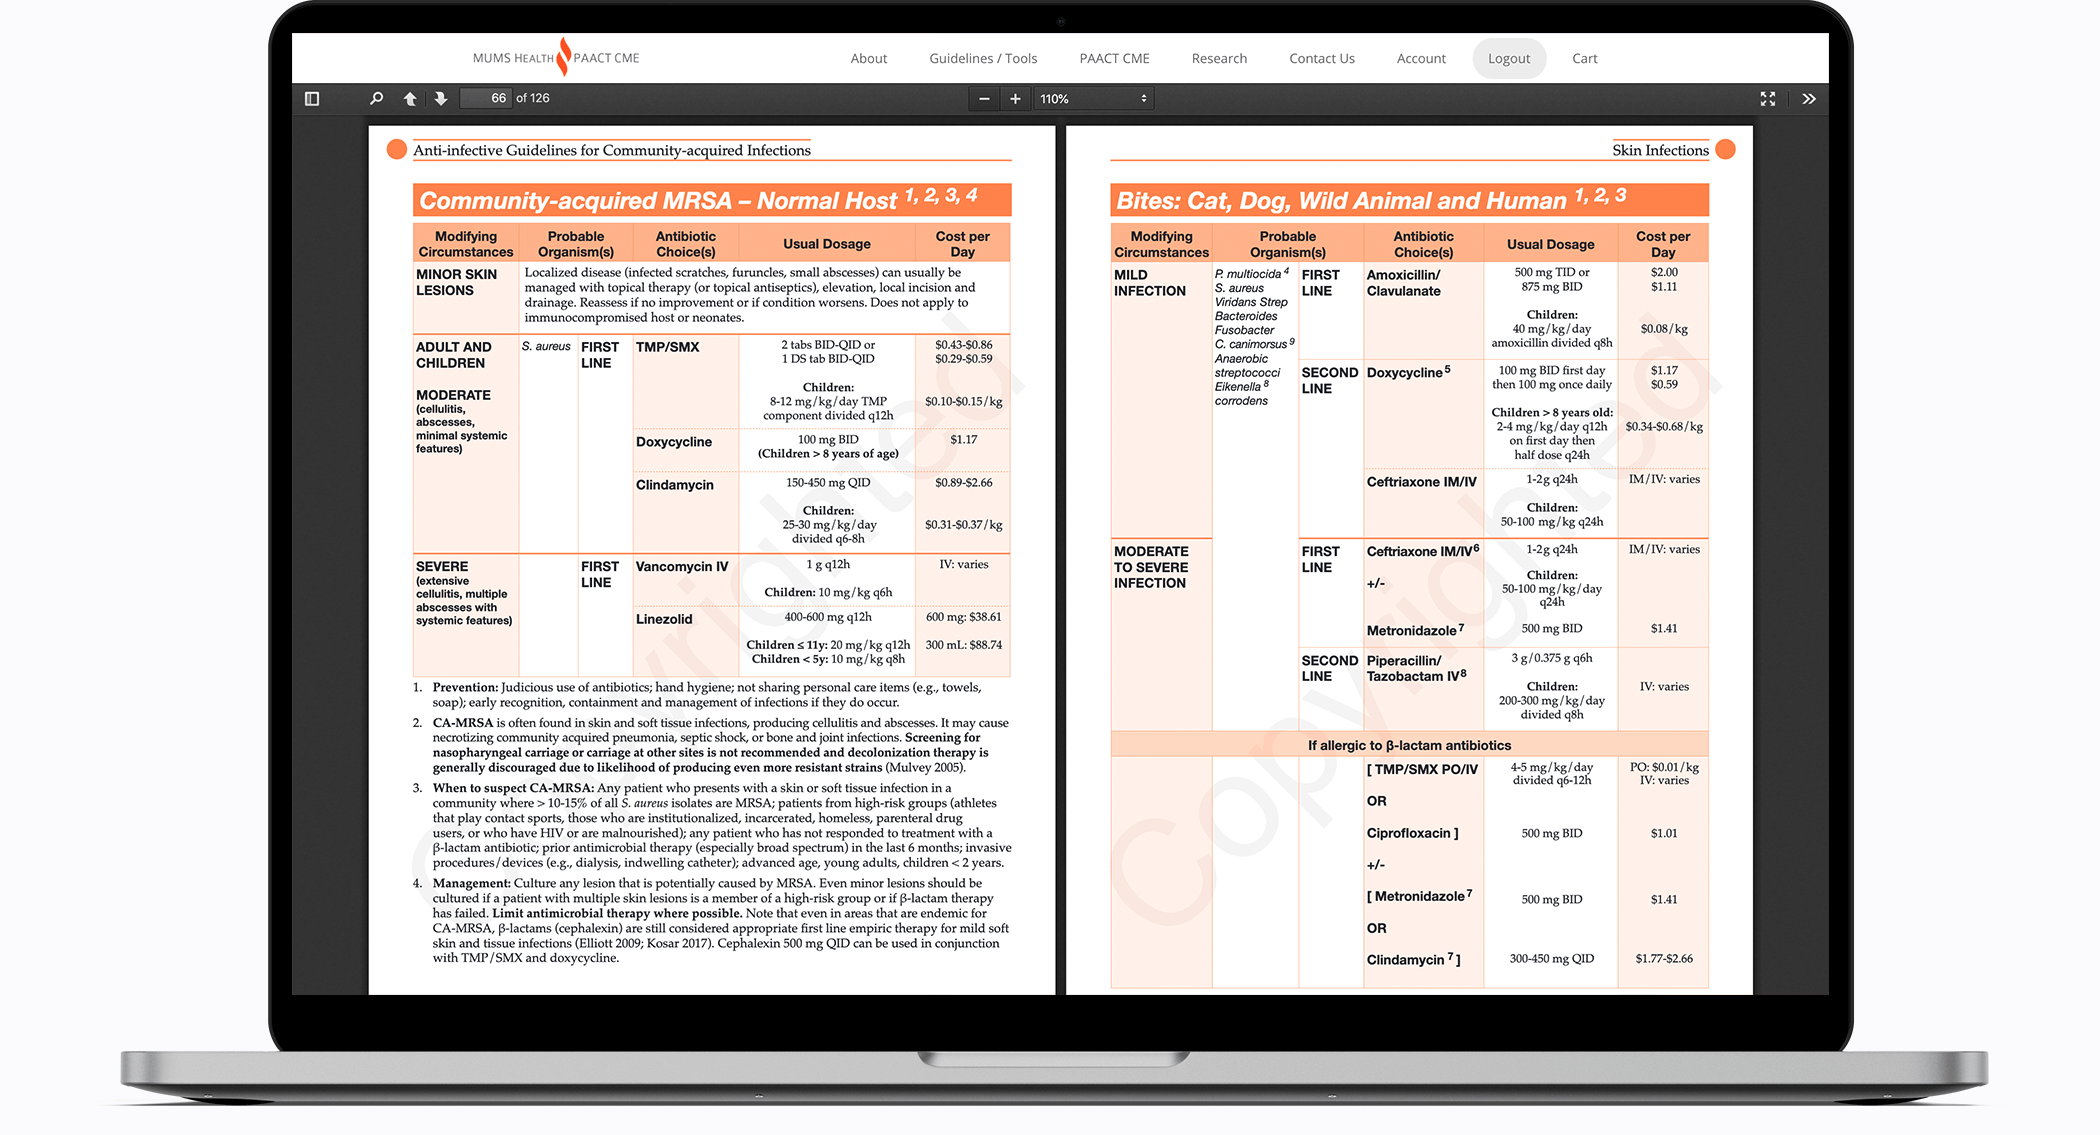 An image of a Macbook with the online version of the Anti-infective guideline on them